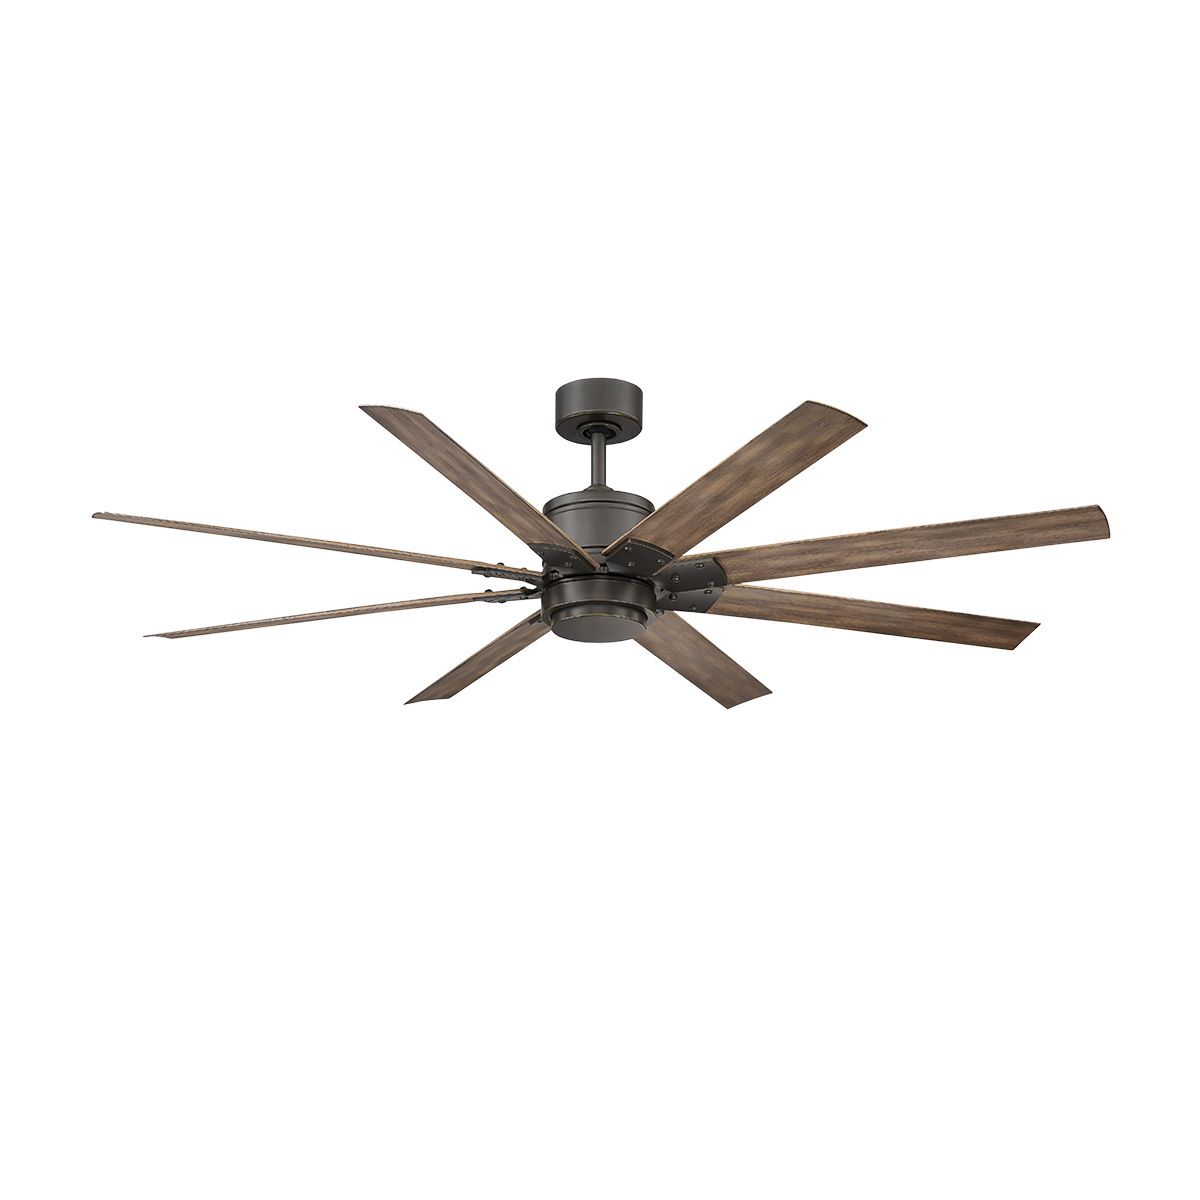 Renegade 52 Inch Windmill Outdoor Smart Ceiling Fan With Light And Remote, Oil Rubbed Bronze Finish - Bees Lighting